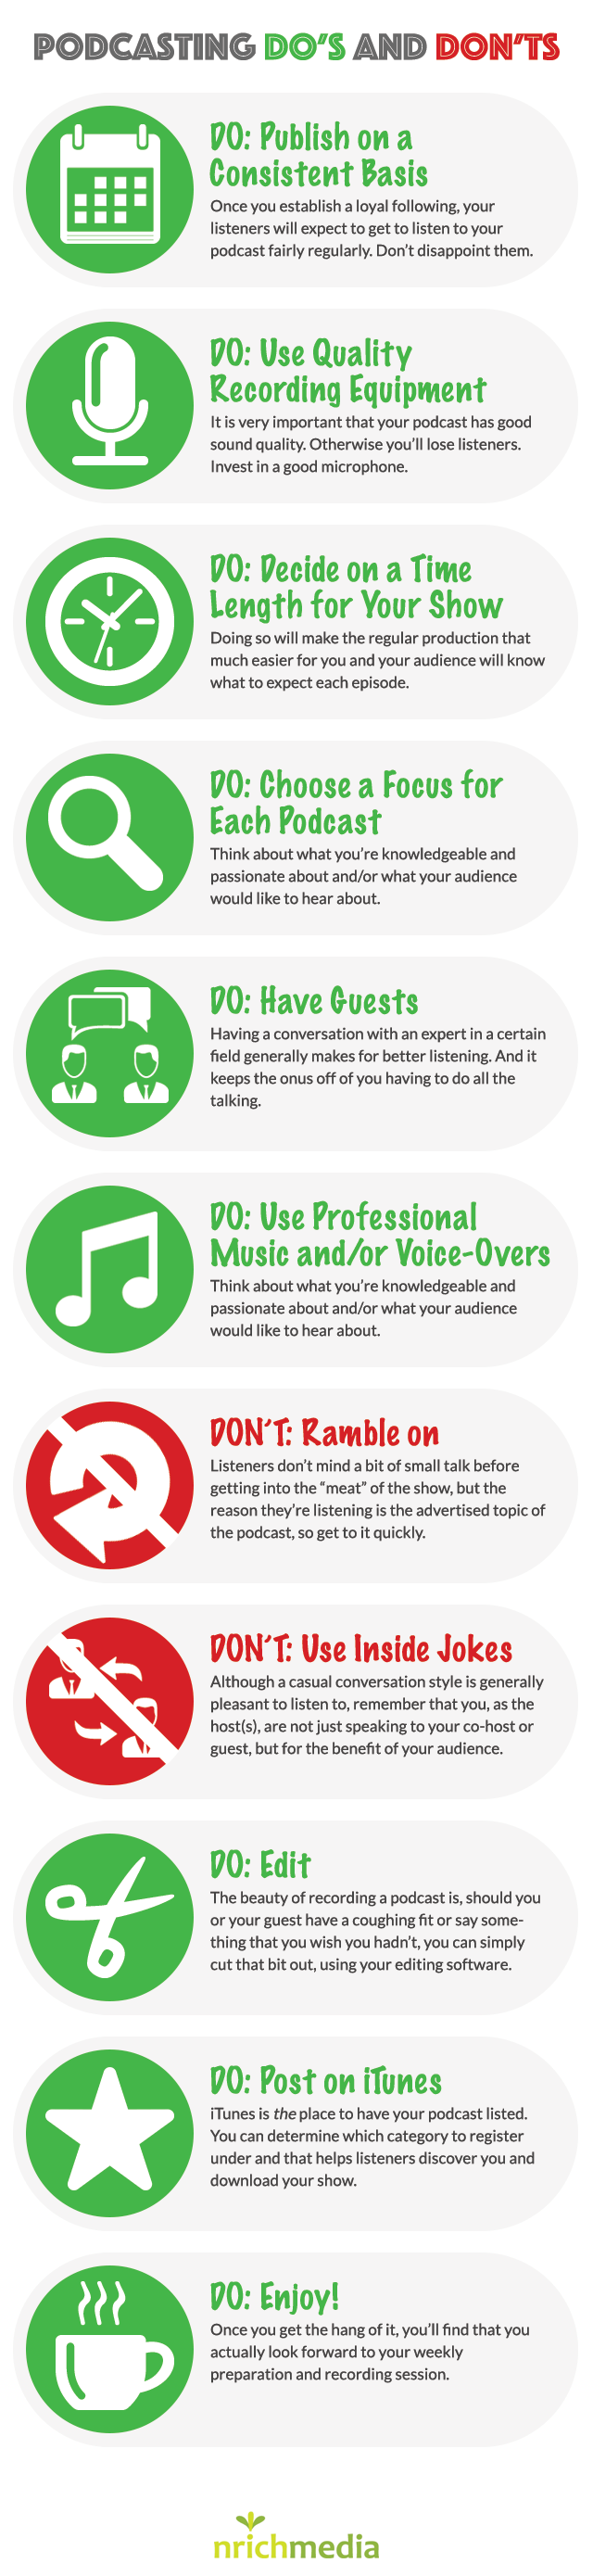 Podcasting Do's and Don'ts